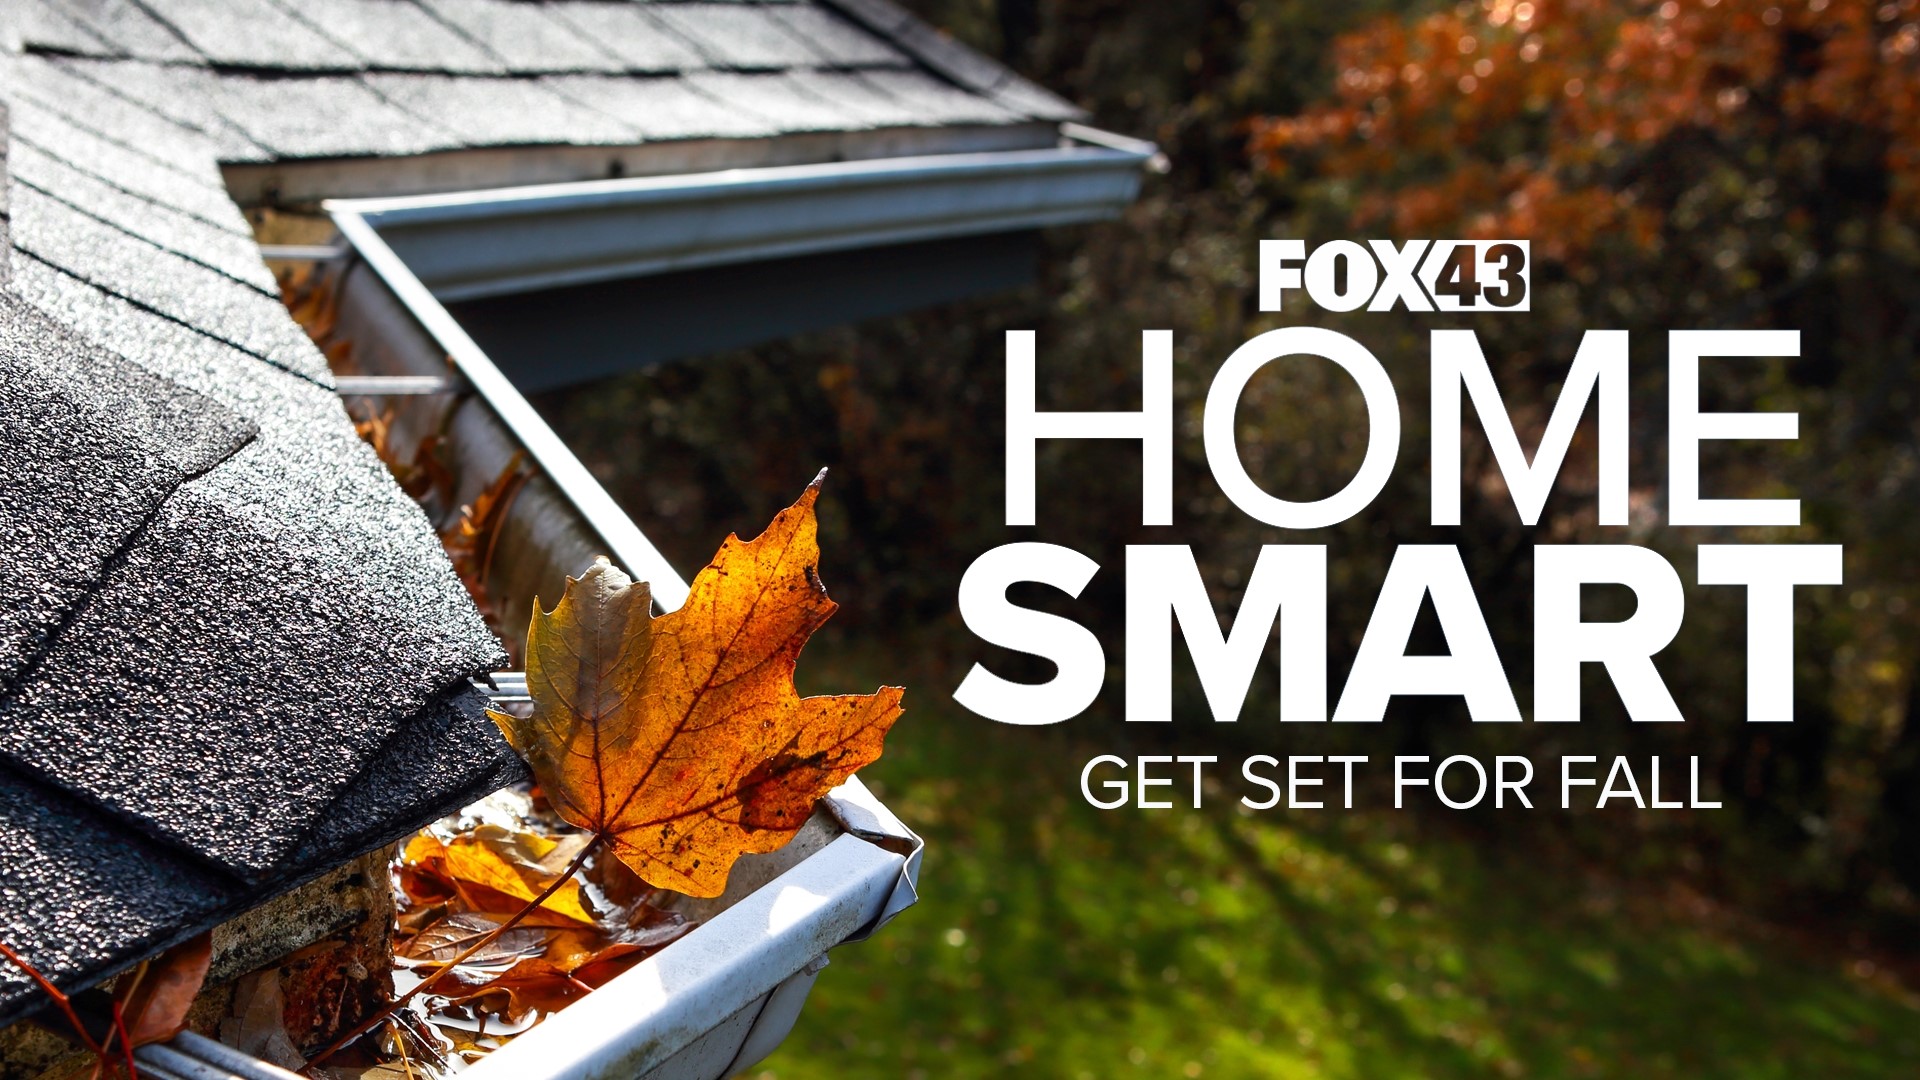 This Home Smart special takes you inside the preparations you need to take to make sure your home is ready for the fall season.